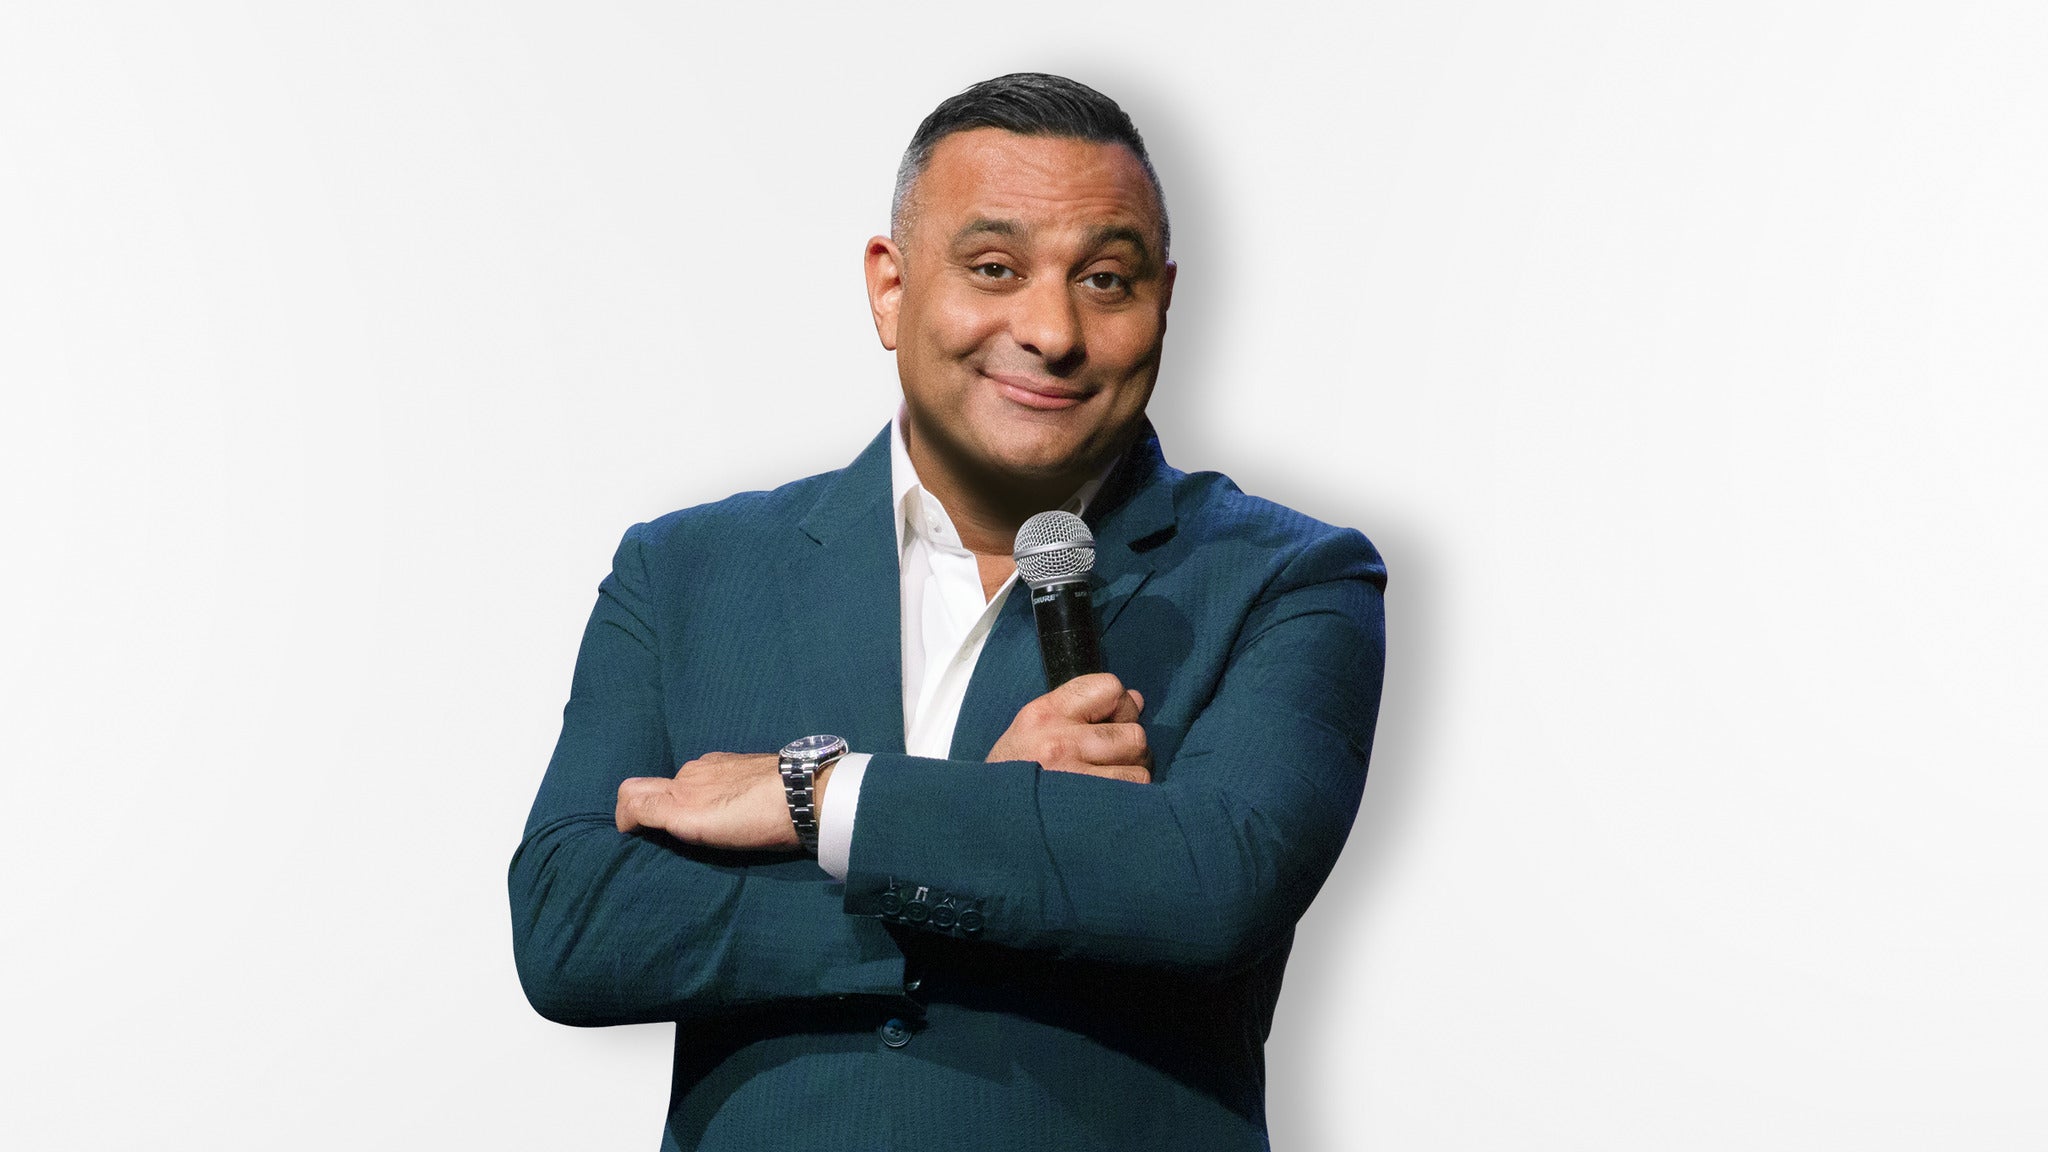 Russell Peters - Act Your Age World Tour